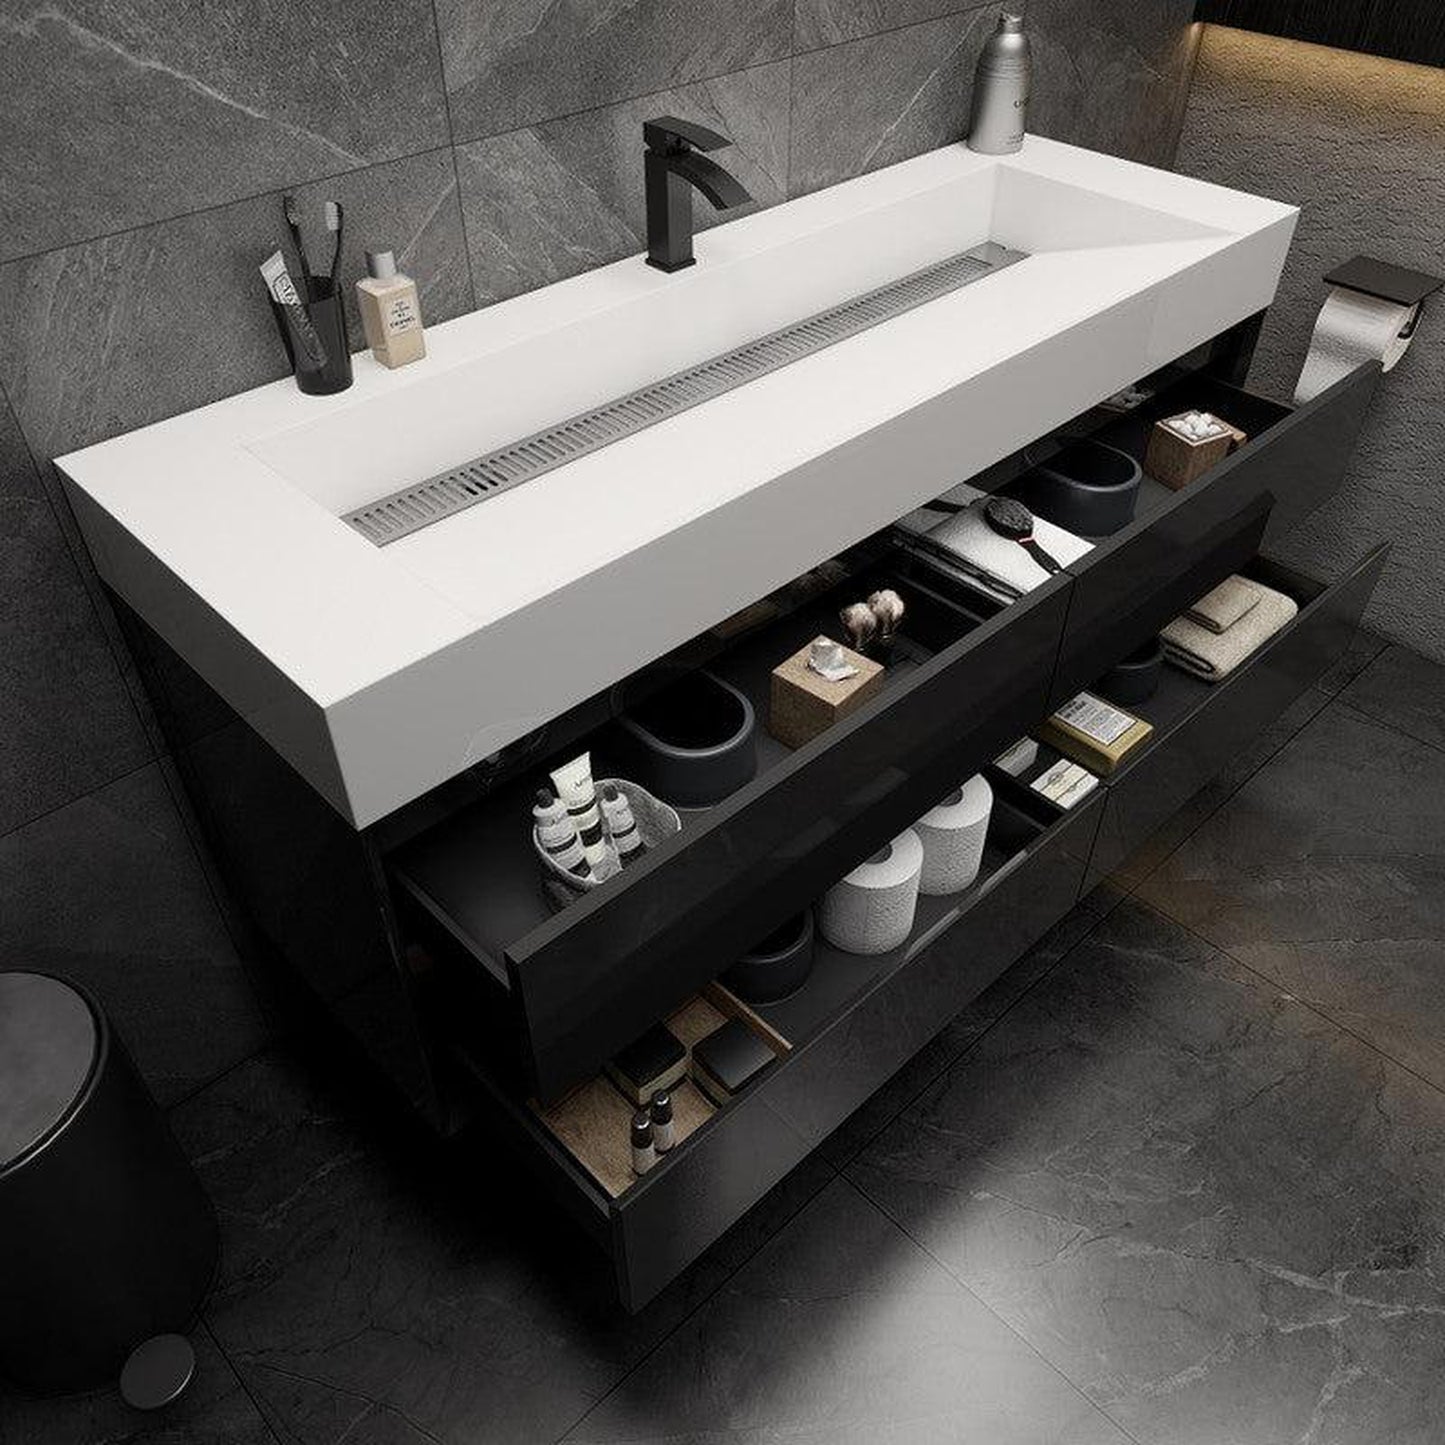 Moreno Bath MAX 60" Gloss Black Wall-Mounted Vanity With Single Faucet Hole and Reinforced White Acrylic Sink